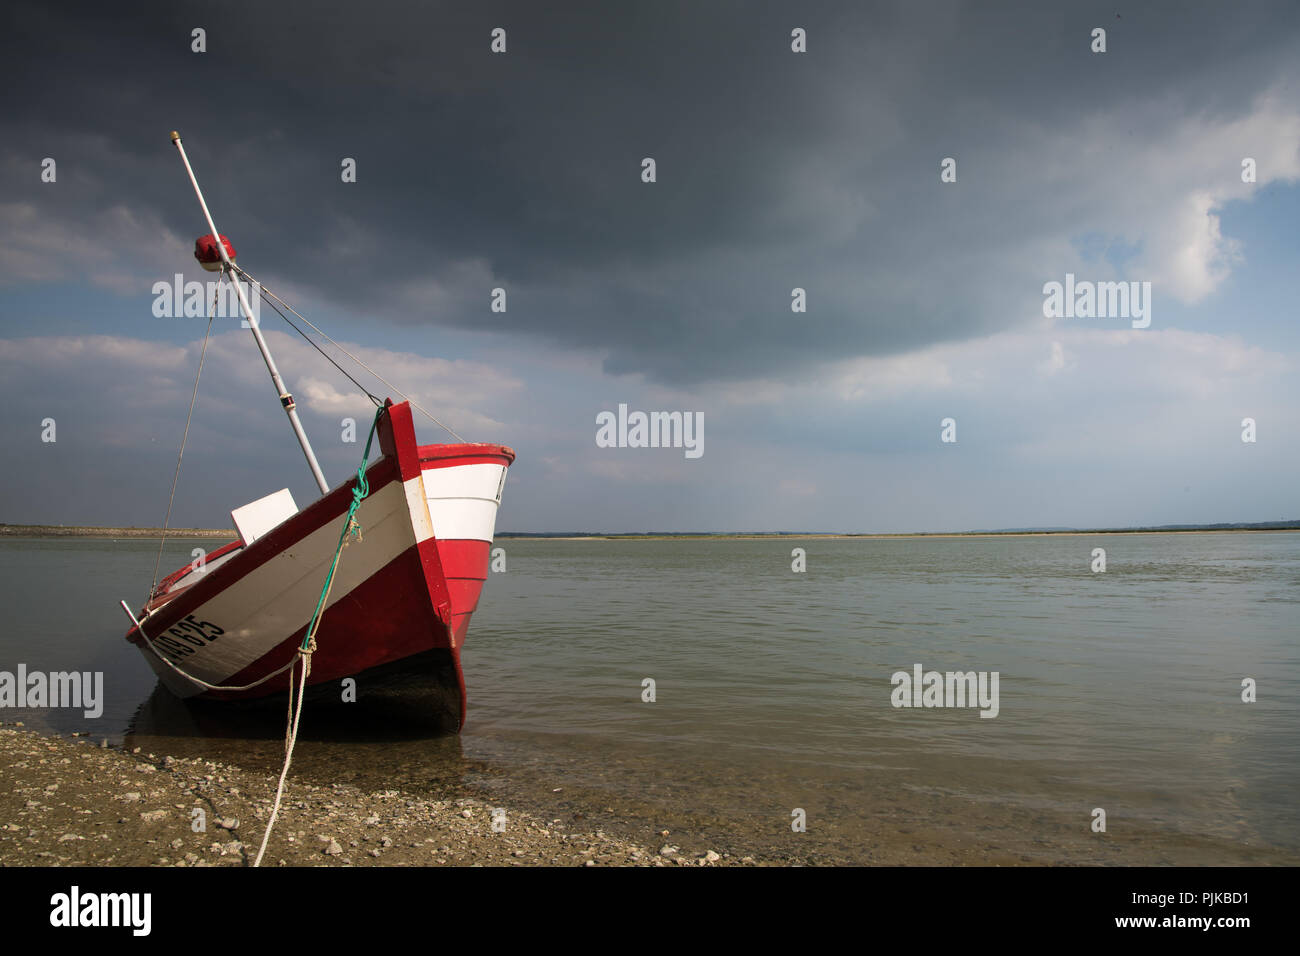 Boat at Baie de Somme Stock Photo